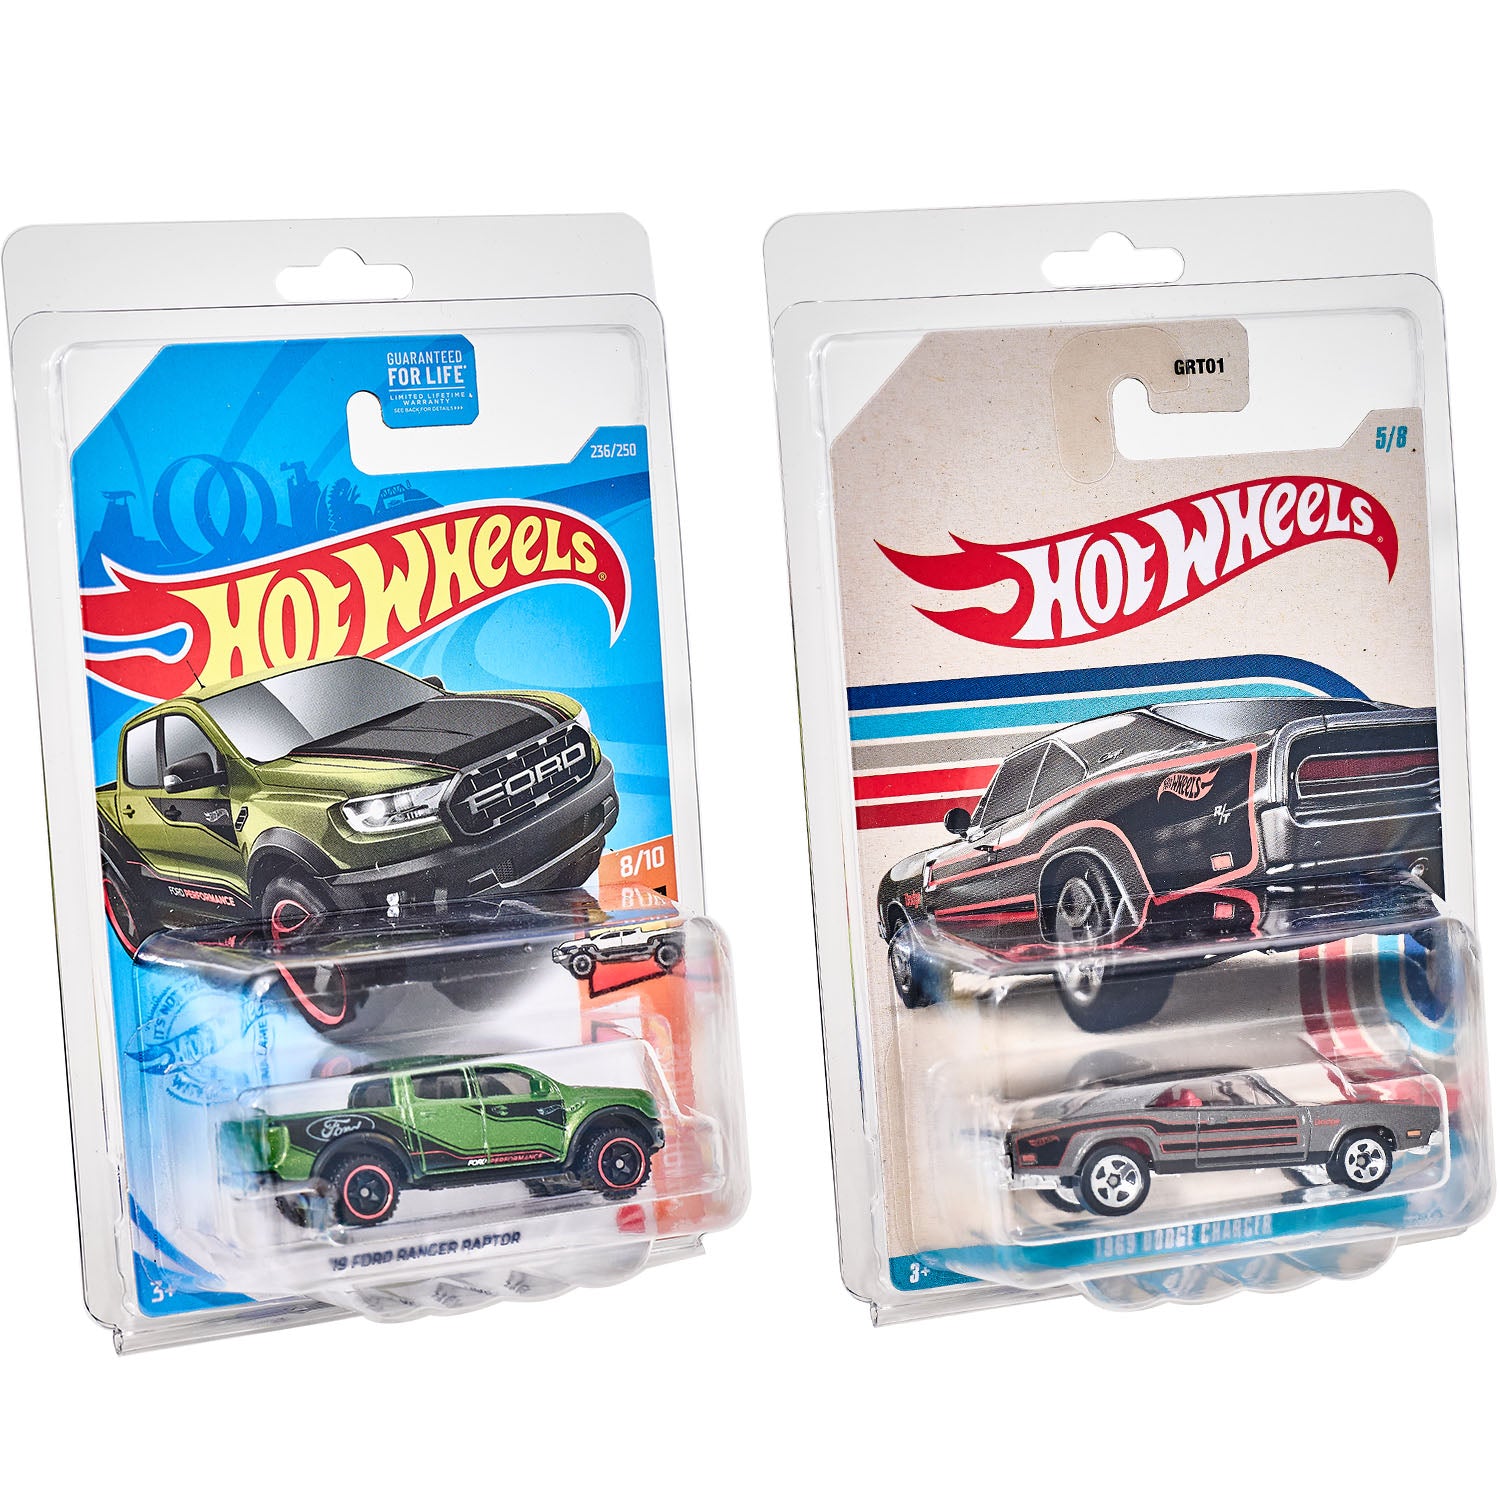 Platinum Protectors for Hot Wheels Mainline & Matchbox (with retail packaging)